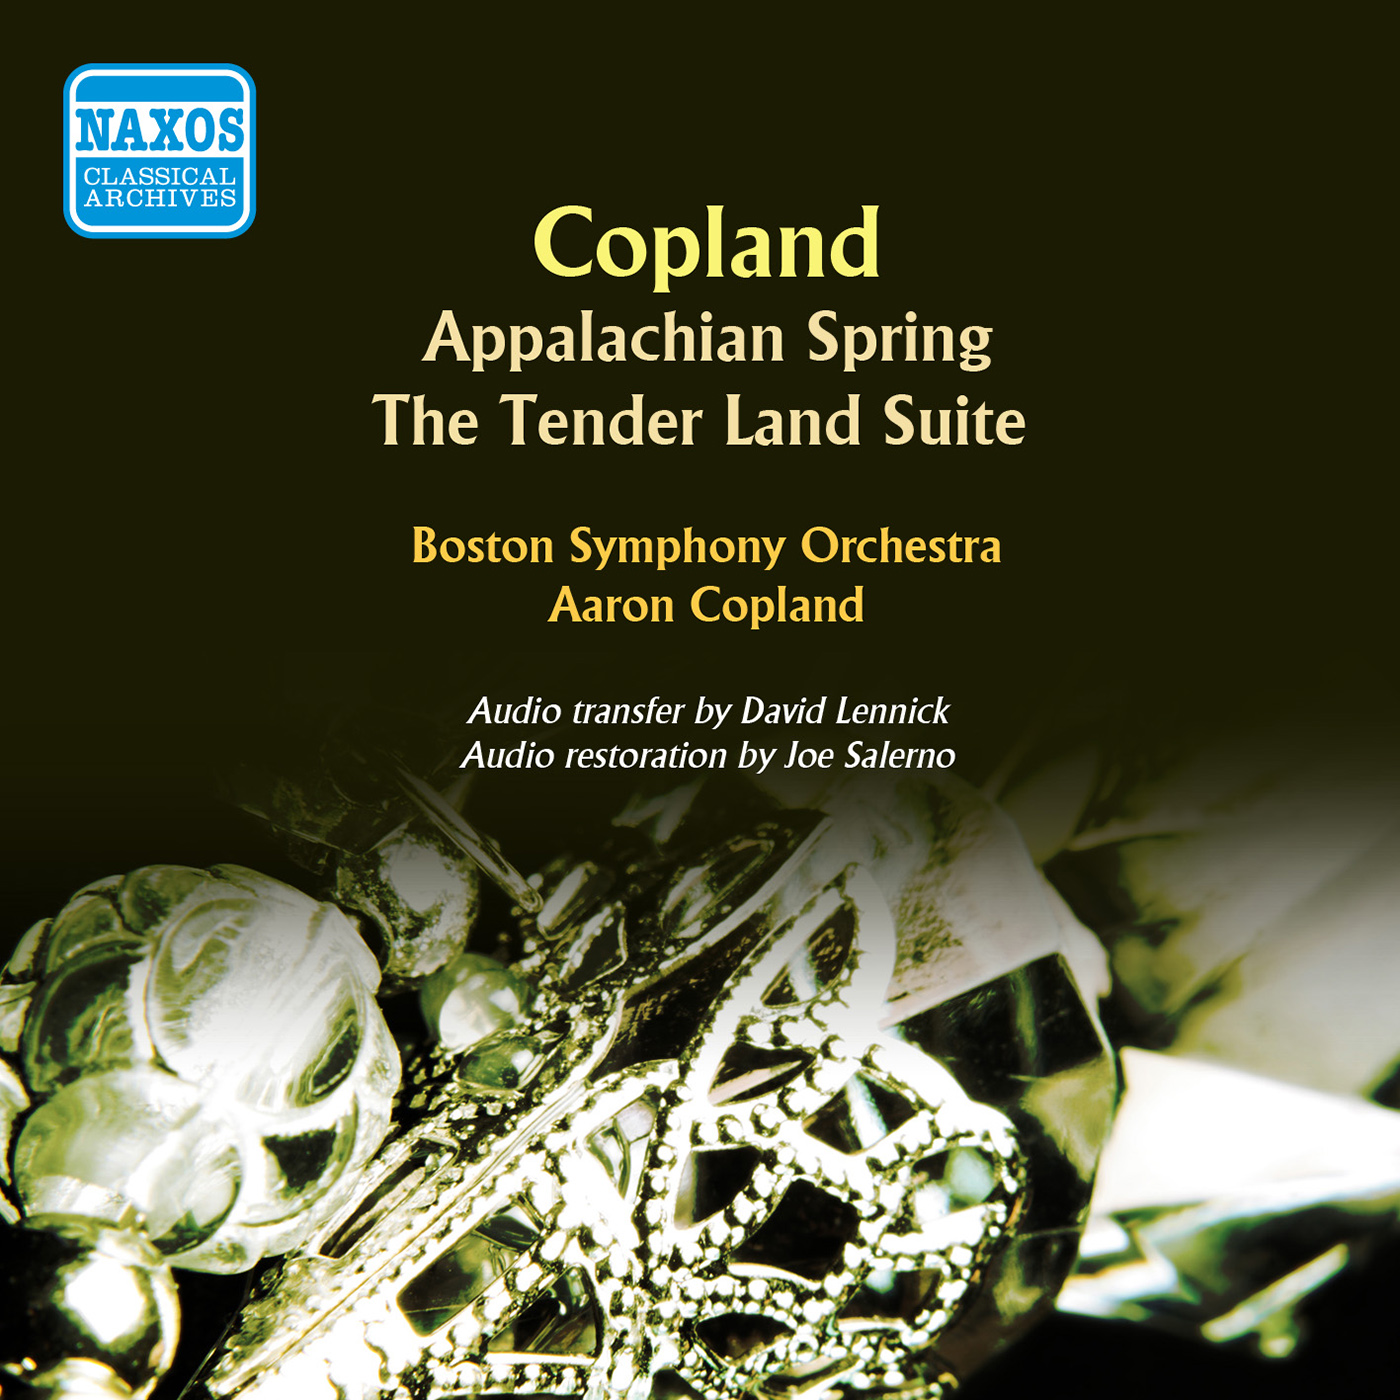 COPLAND, A.: Appalachian Spring / The Tender Land Suite (Boston Symphony, Copland)